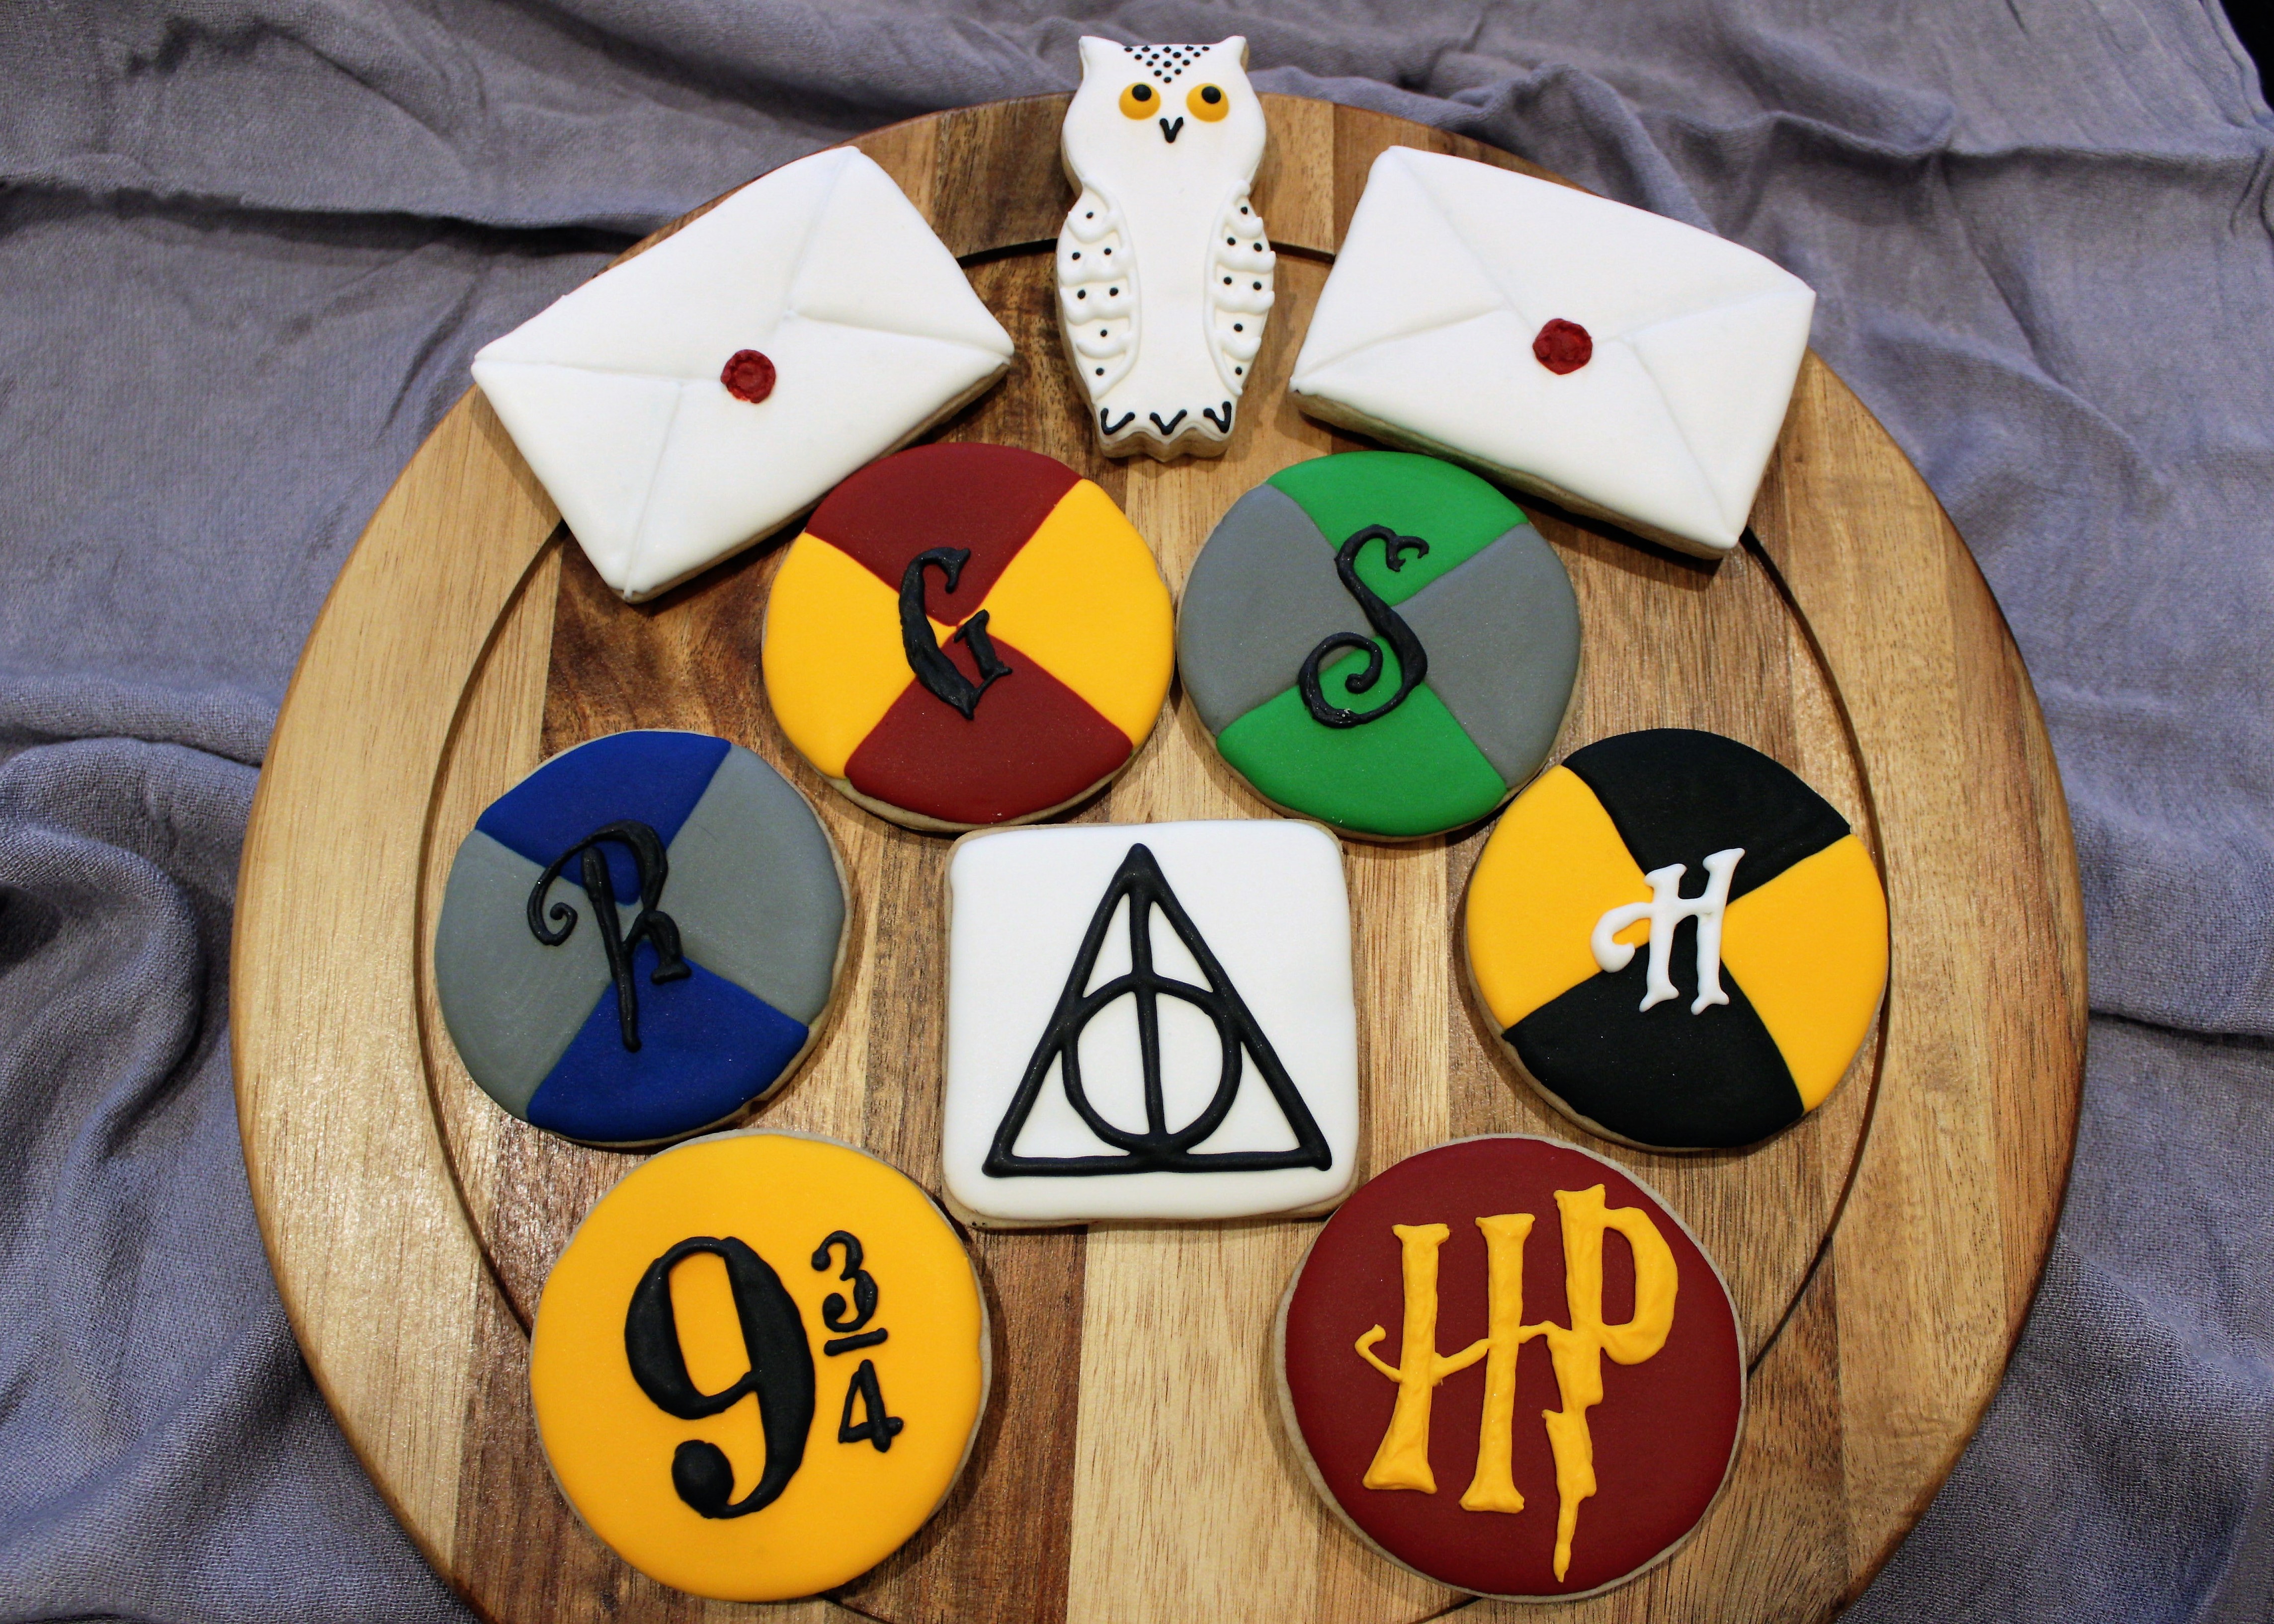 The finished product, Harry Potter cookies dried and ready to bag.